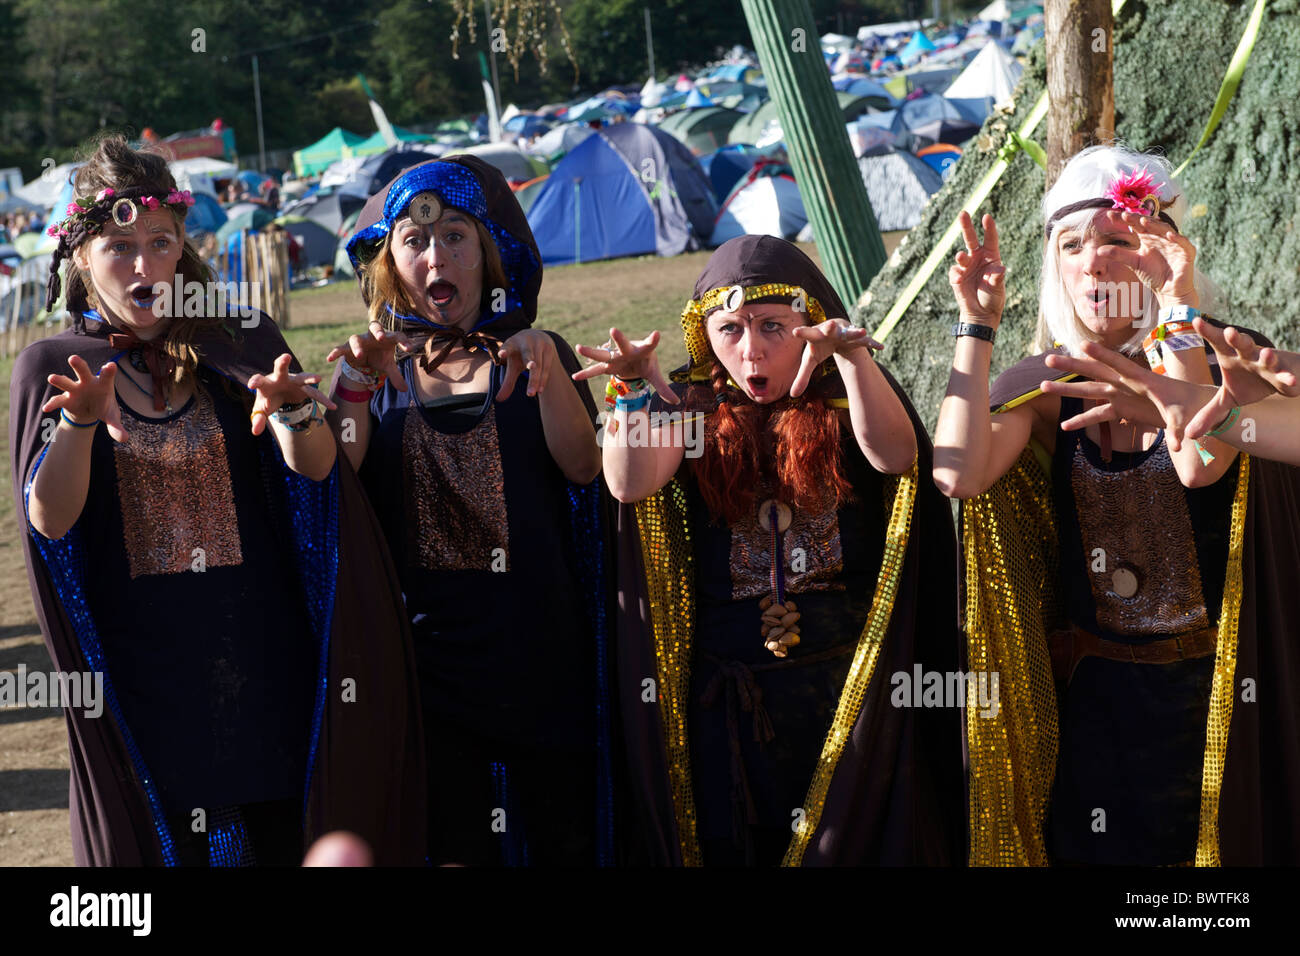 Gypsy dressed performers entertain a crowd on the final day of Bestival 2010 in Newport, Isle of Wight, England on September Stock Photo